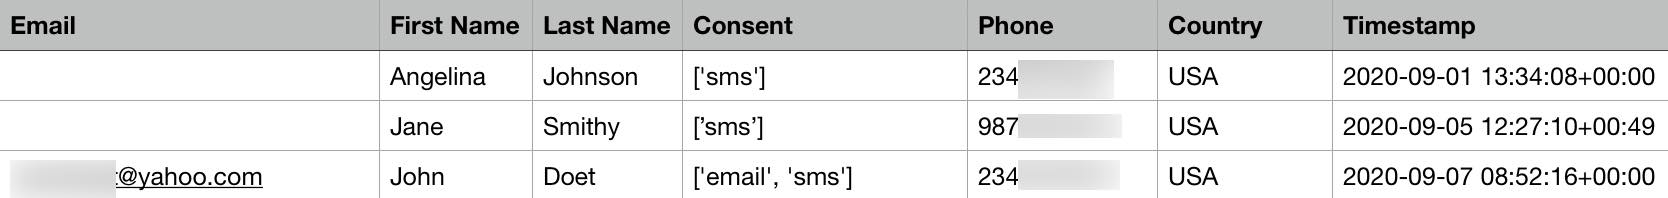 Sample CSV file for importing SMS consent into Klaviyo when there’s a country column